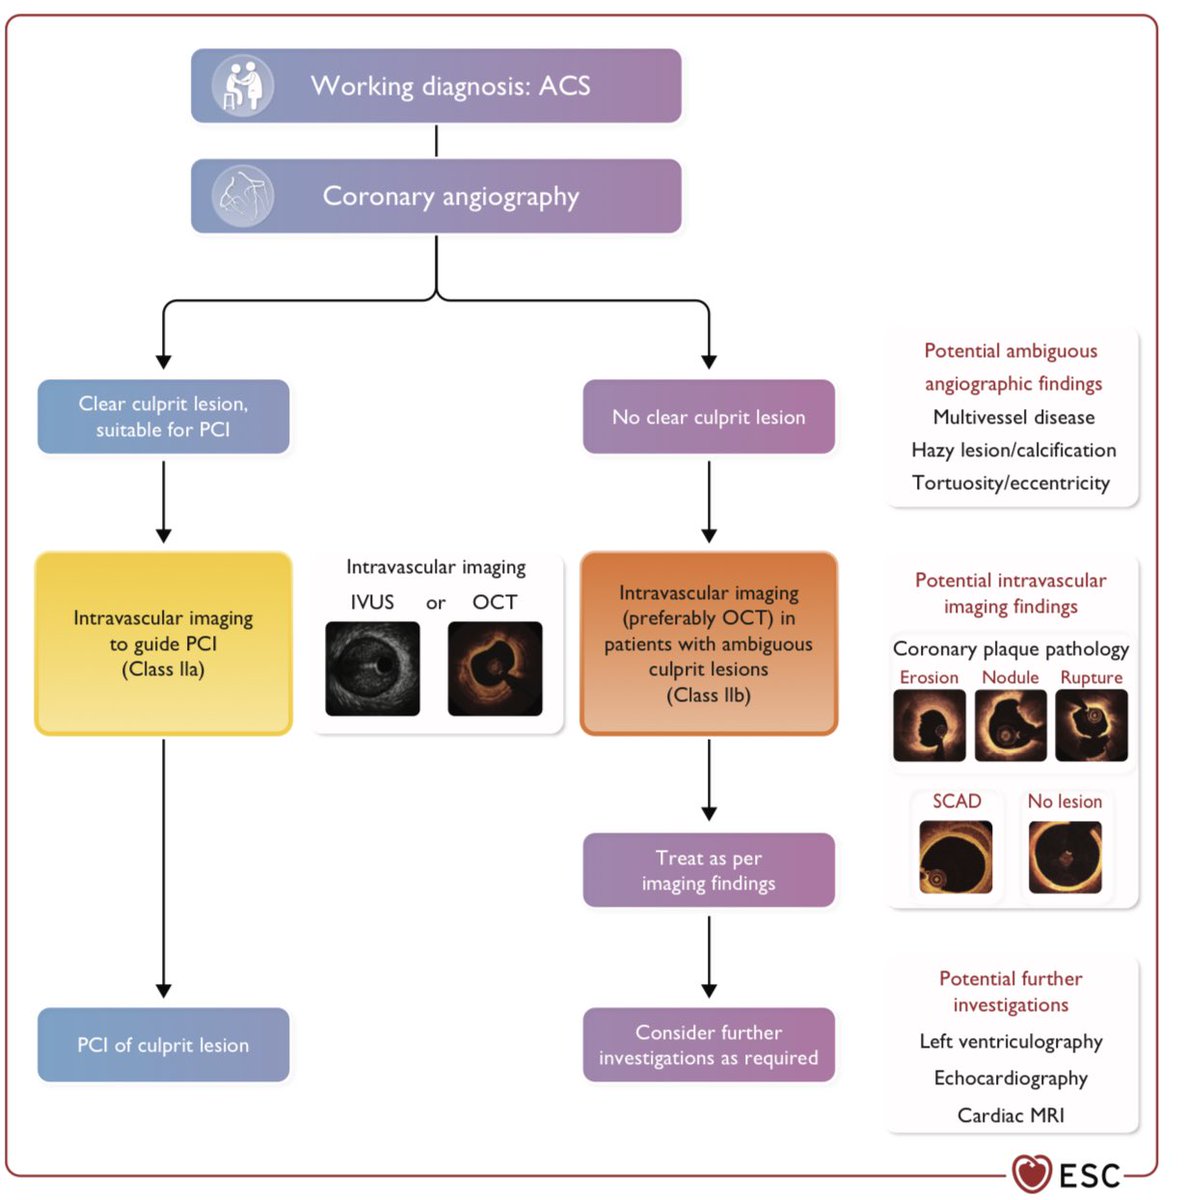 #ImageFirst in #ACS

‼️‼️IIa/A‼️‼️ in the new #ACSguidelines at #ESCcongress

Next stop: 
➡️ I/A for every (complex) PCI 🫶

@mirvatalasnag @jedicath @kaschenke @sulimov_dmitry @thiele_holger @MarcVorpahl @GhanemAlexander @m_leistner 

#PrecisionPCI #ModernPCI #SMARTpci